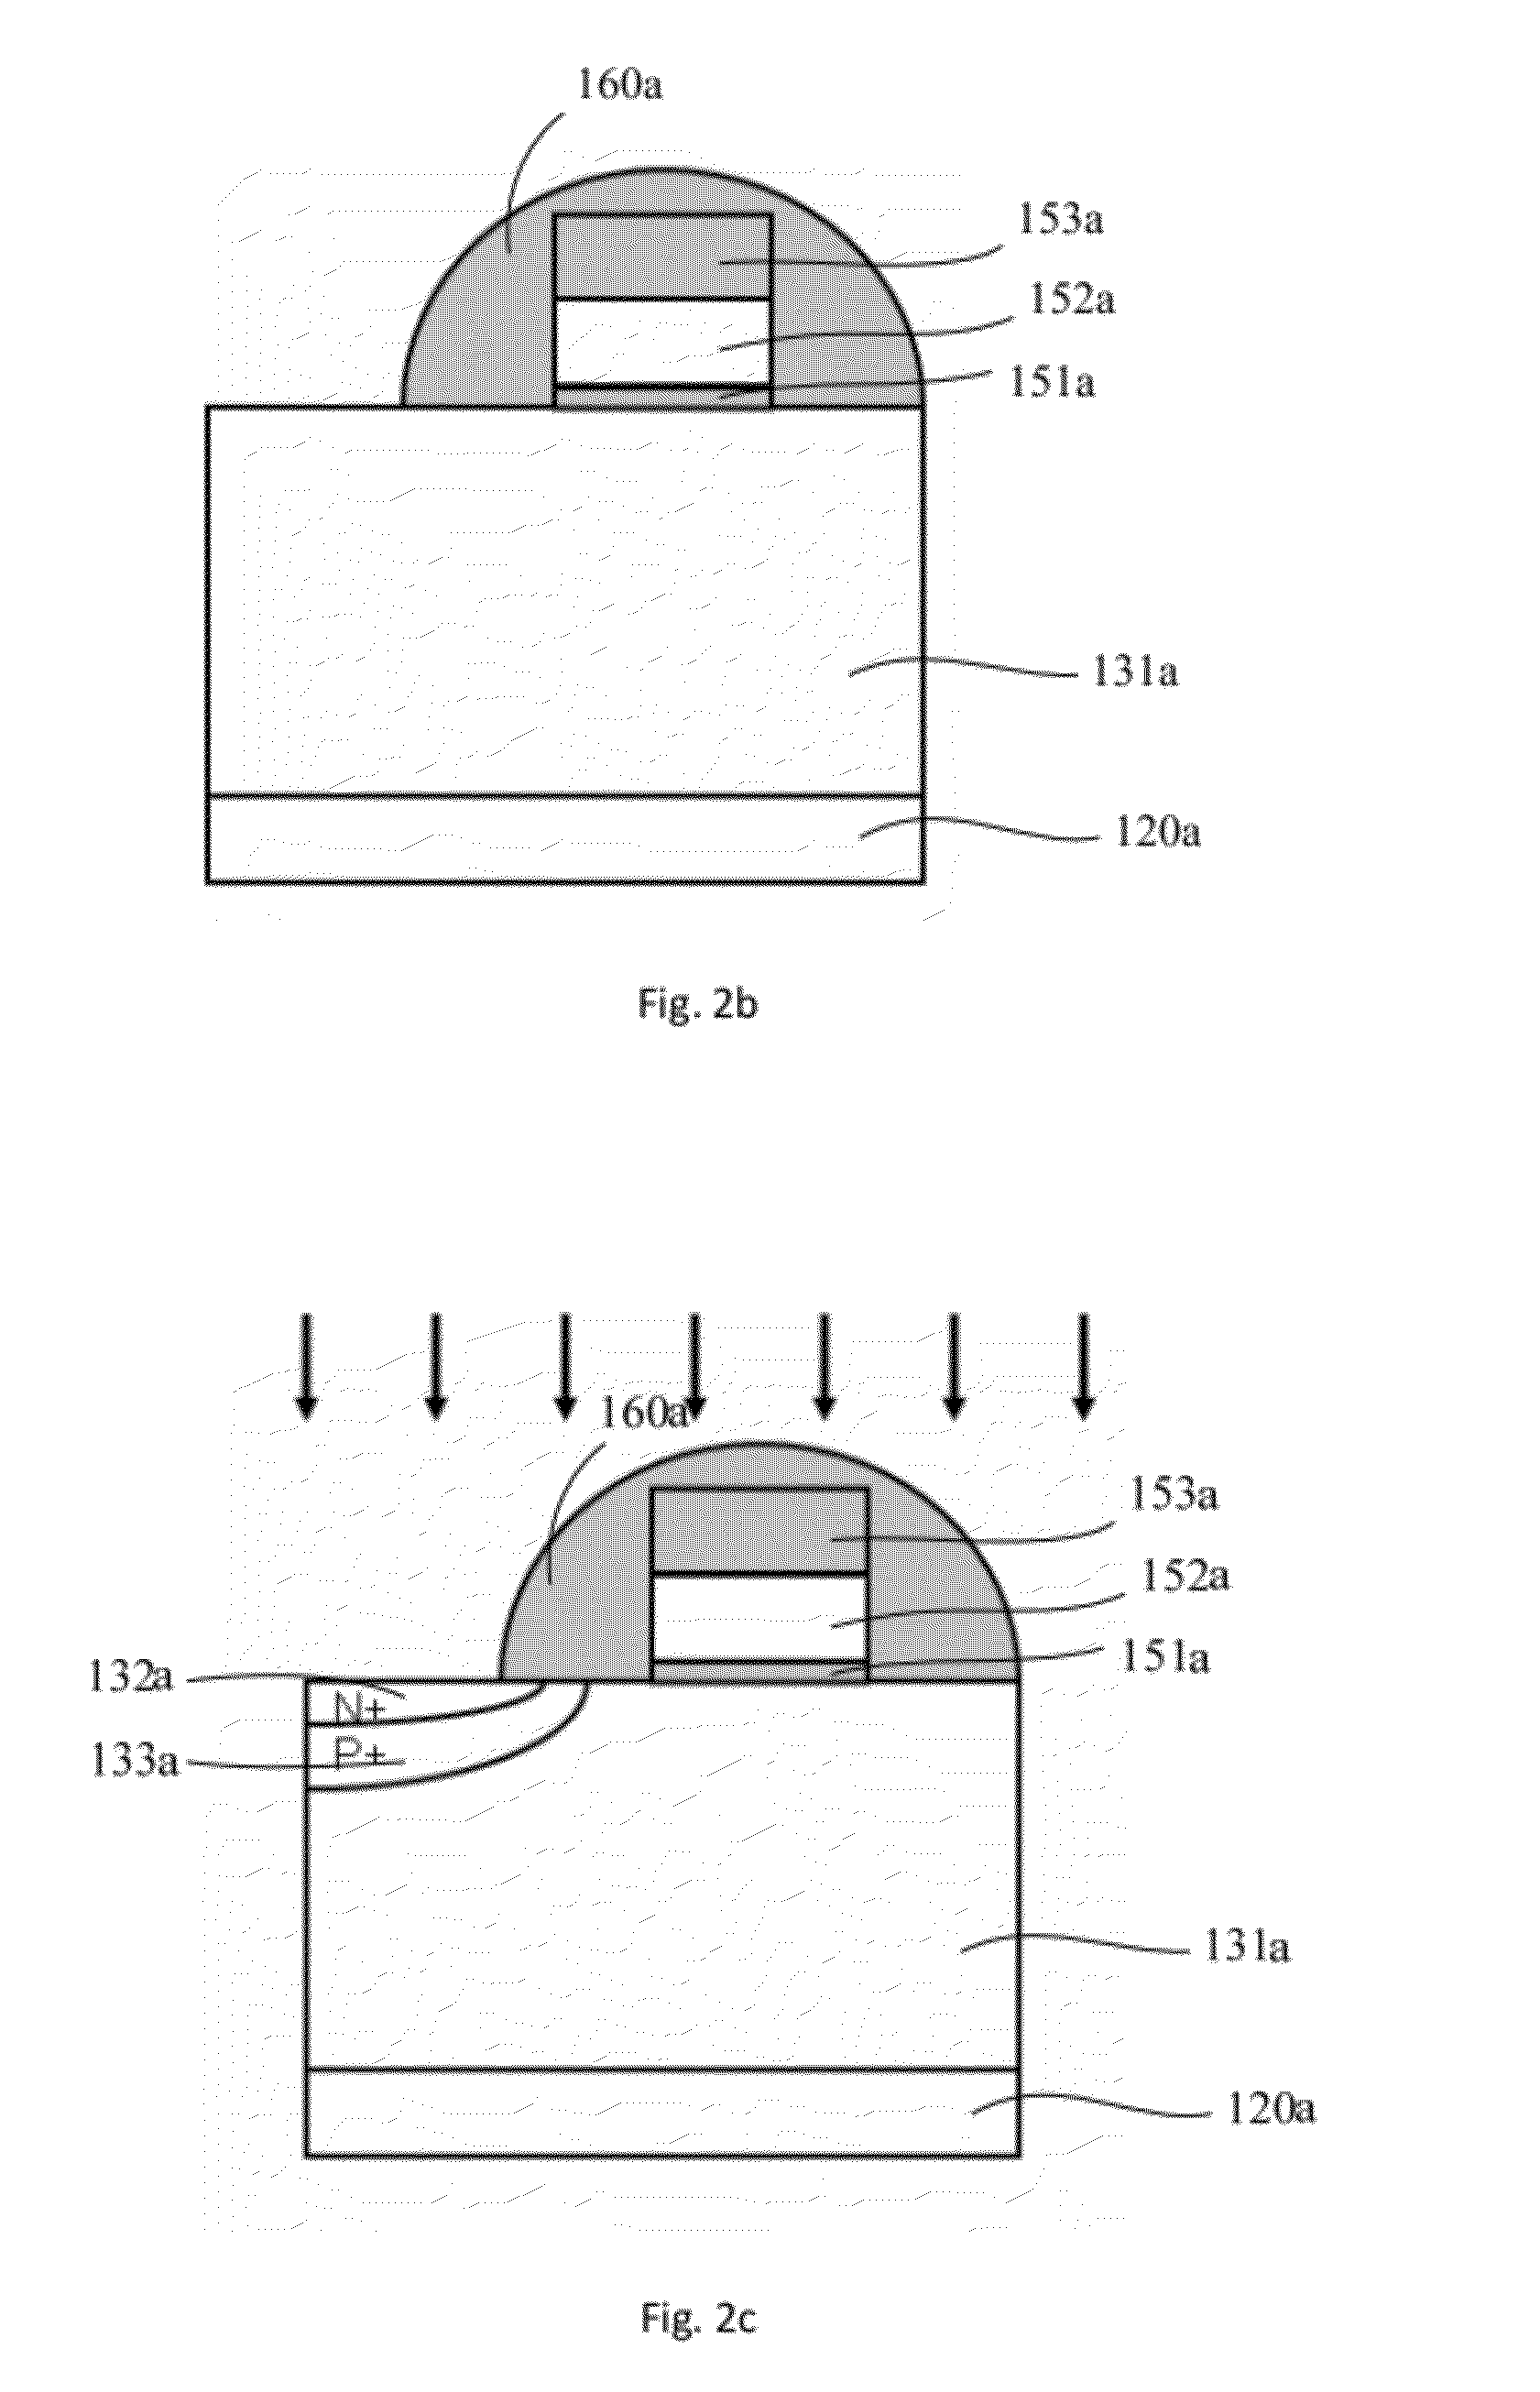 Structure and fabrication process of super junction mosfet